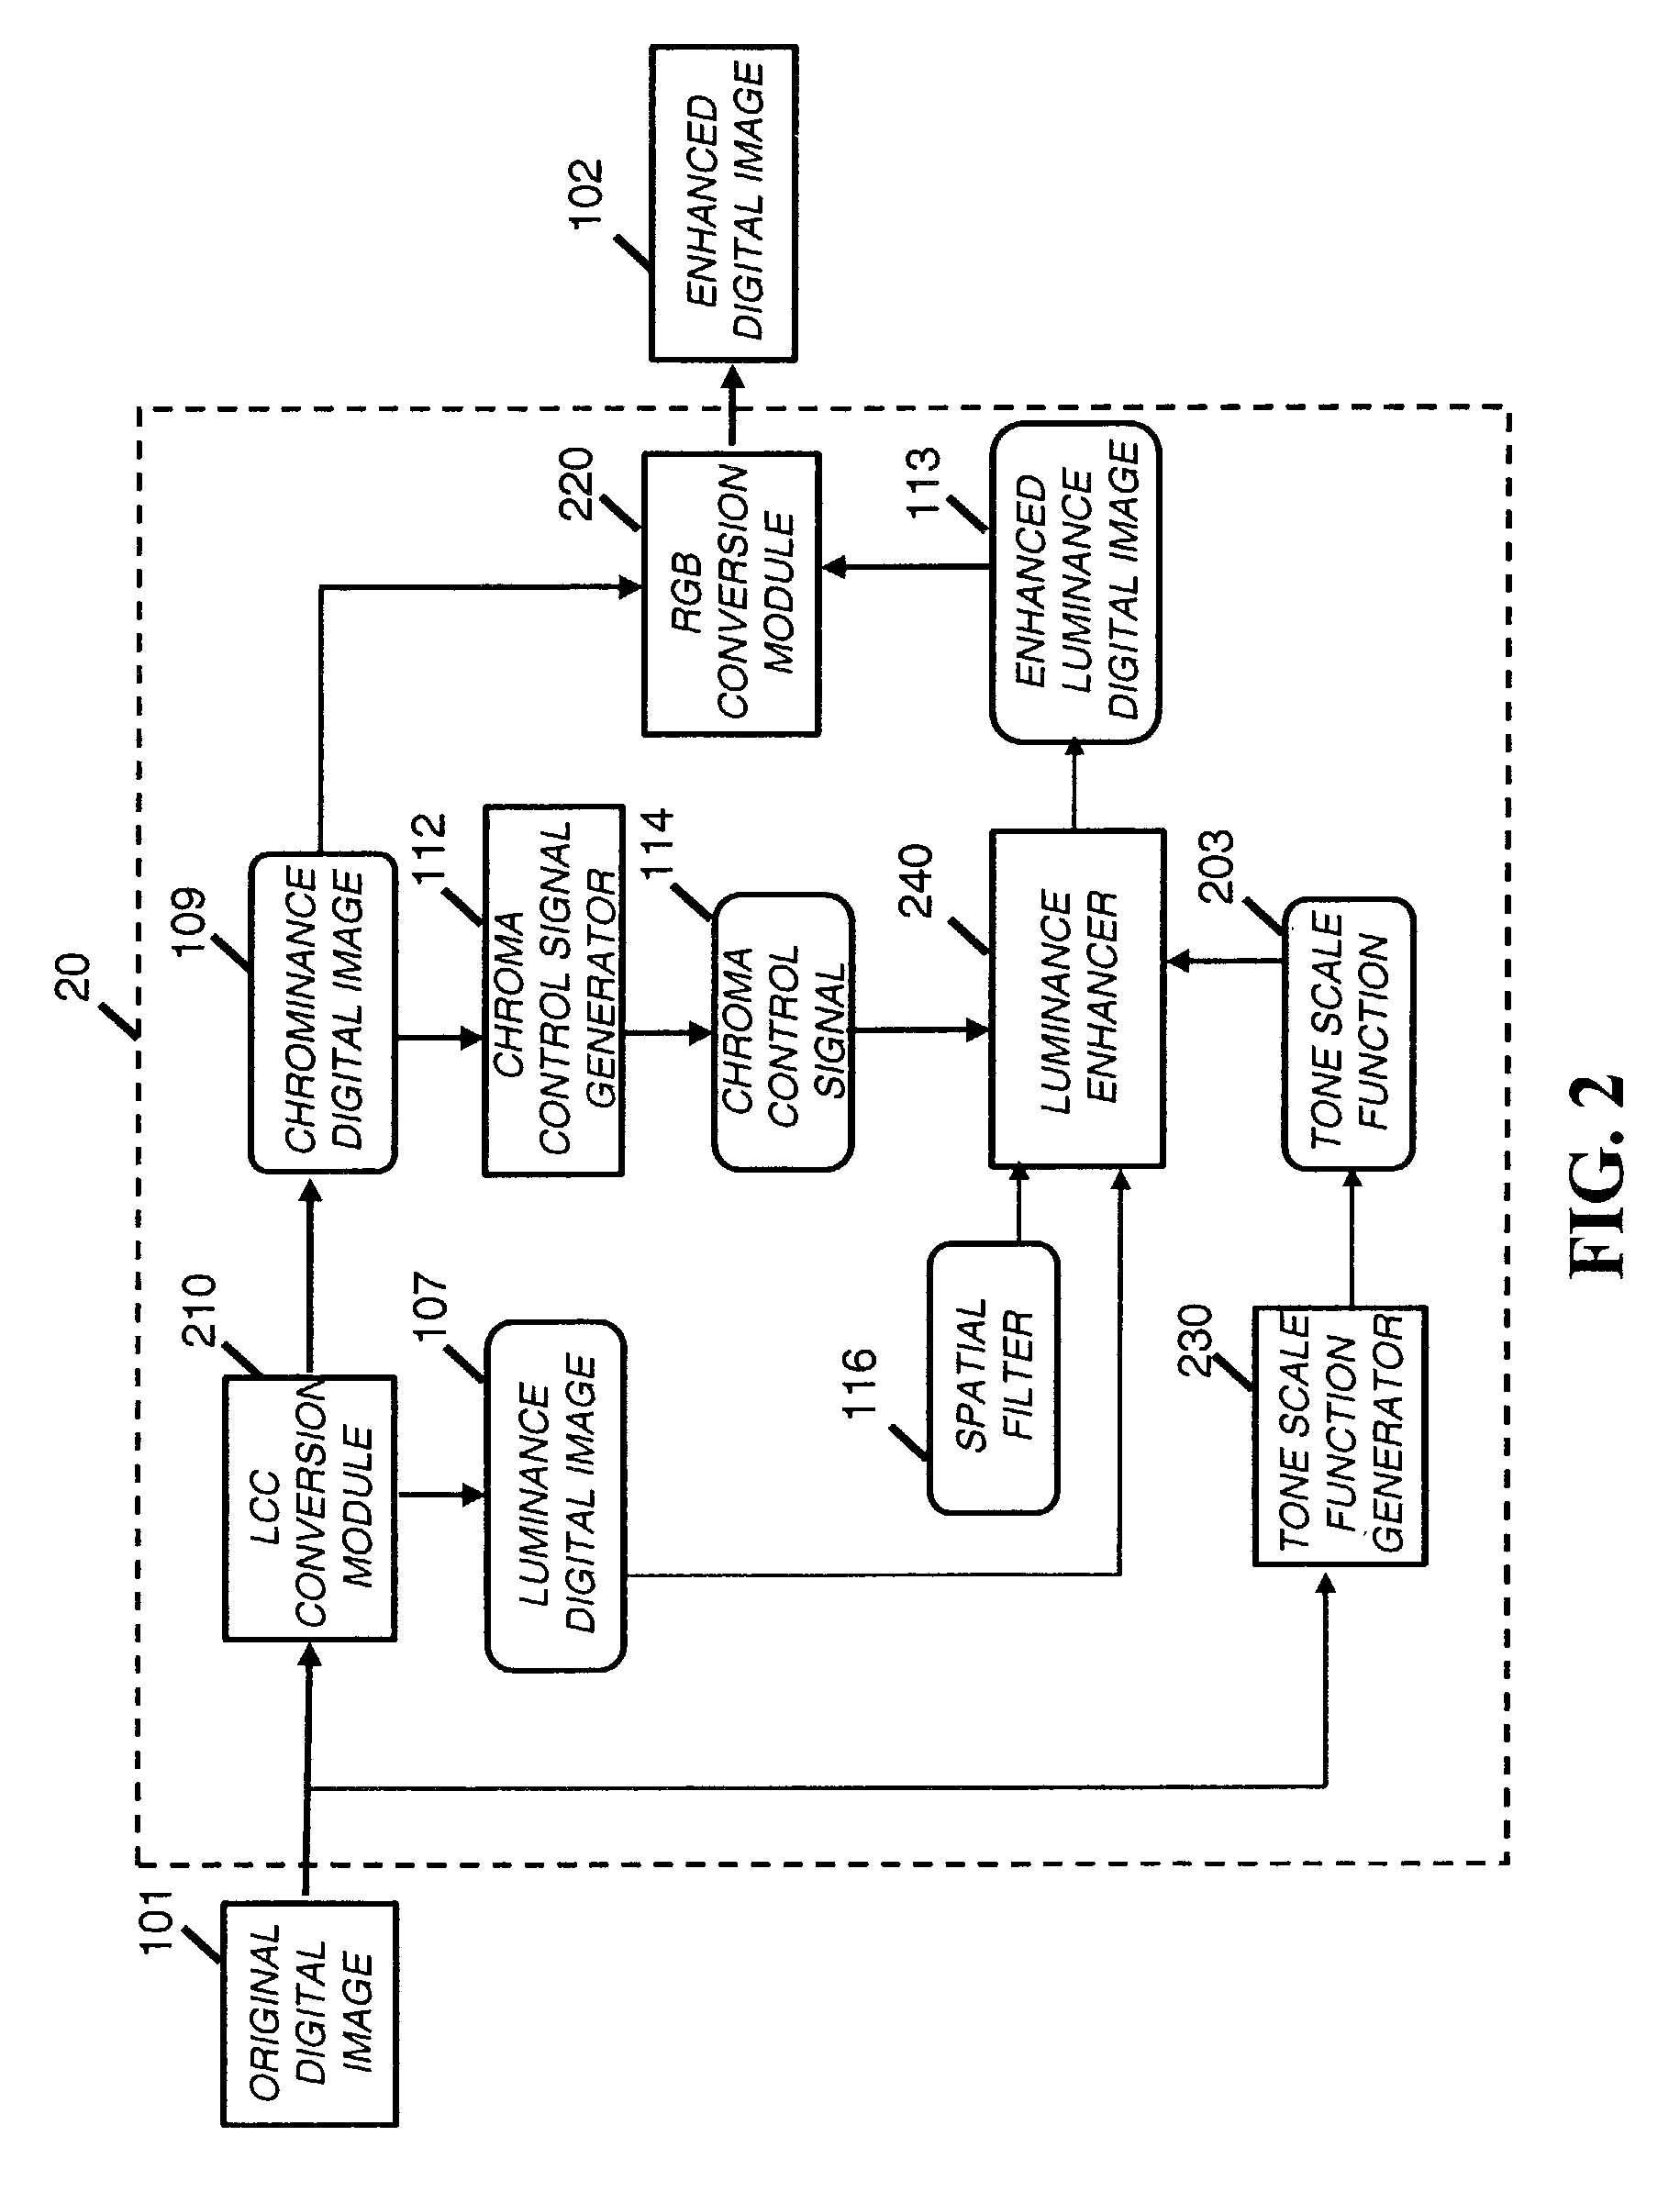 Method of spatially filtering a digital image using chrominance information